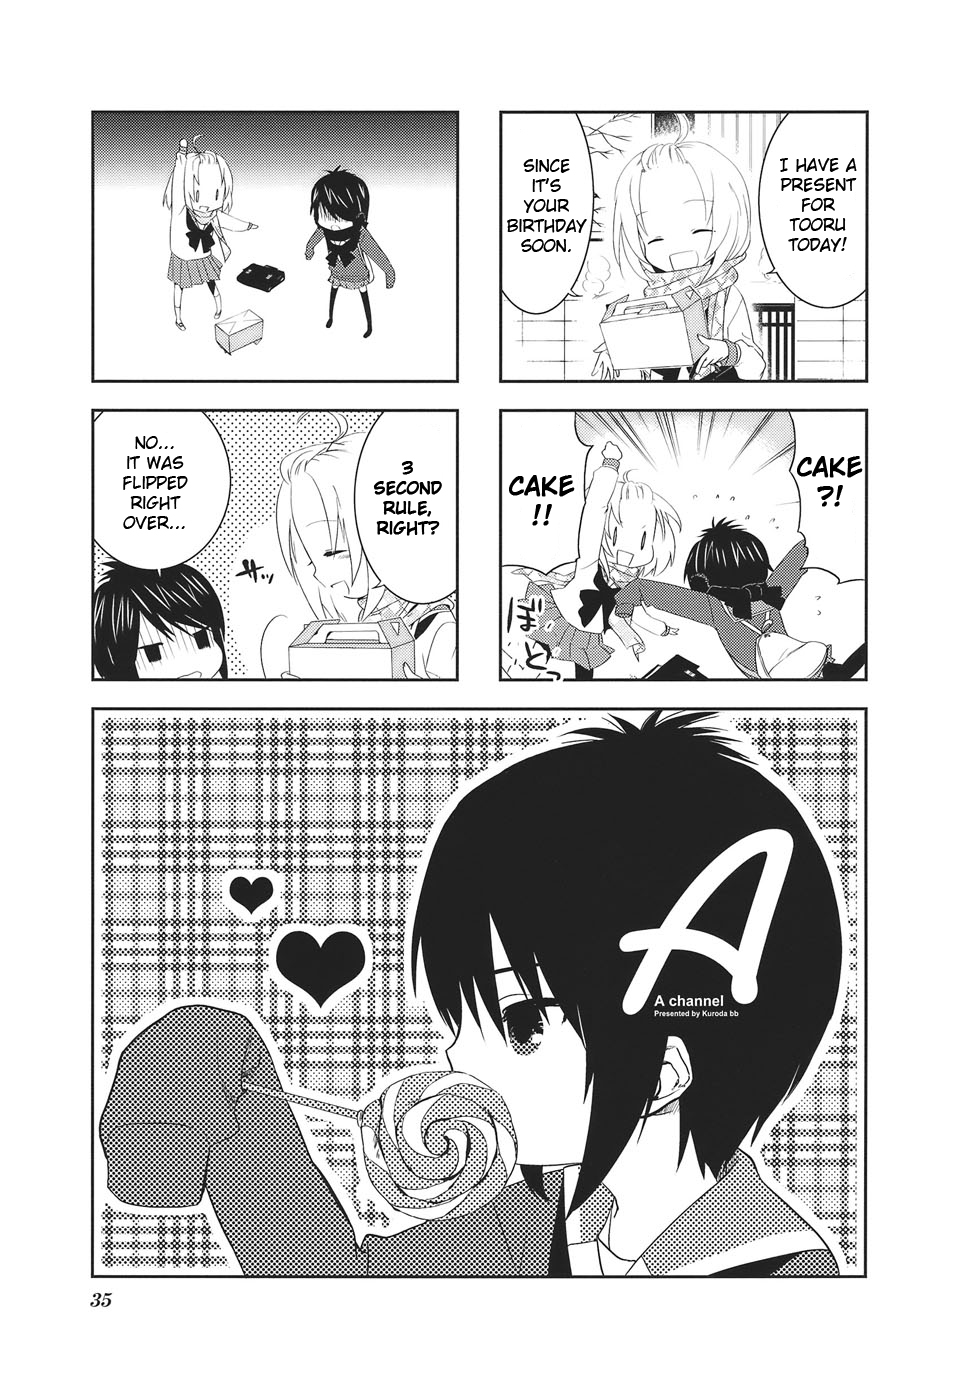 A-Channel Vol.1 Ch.5